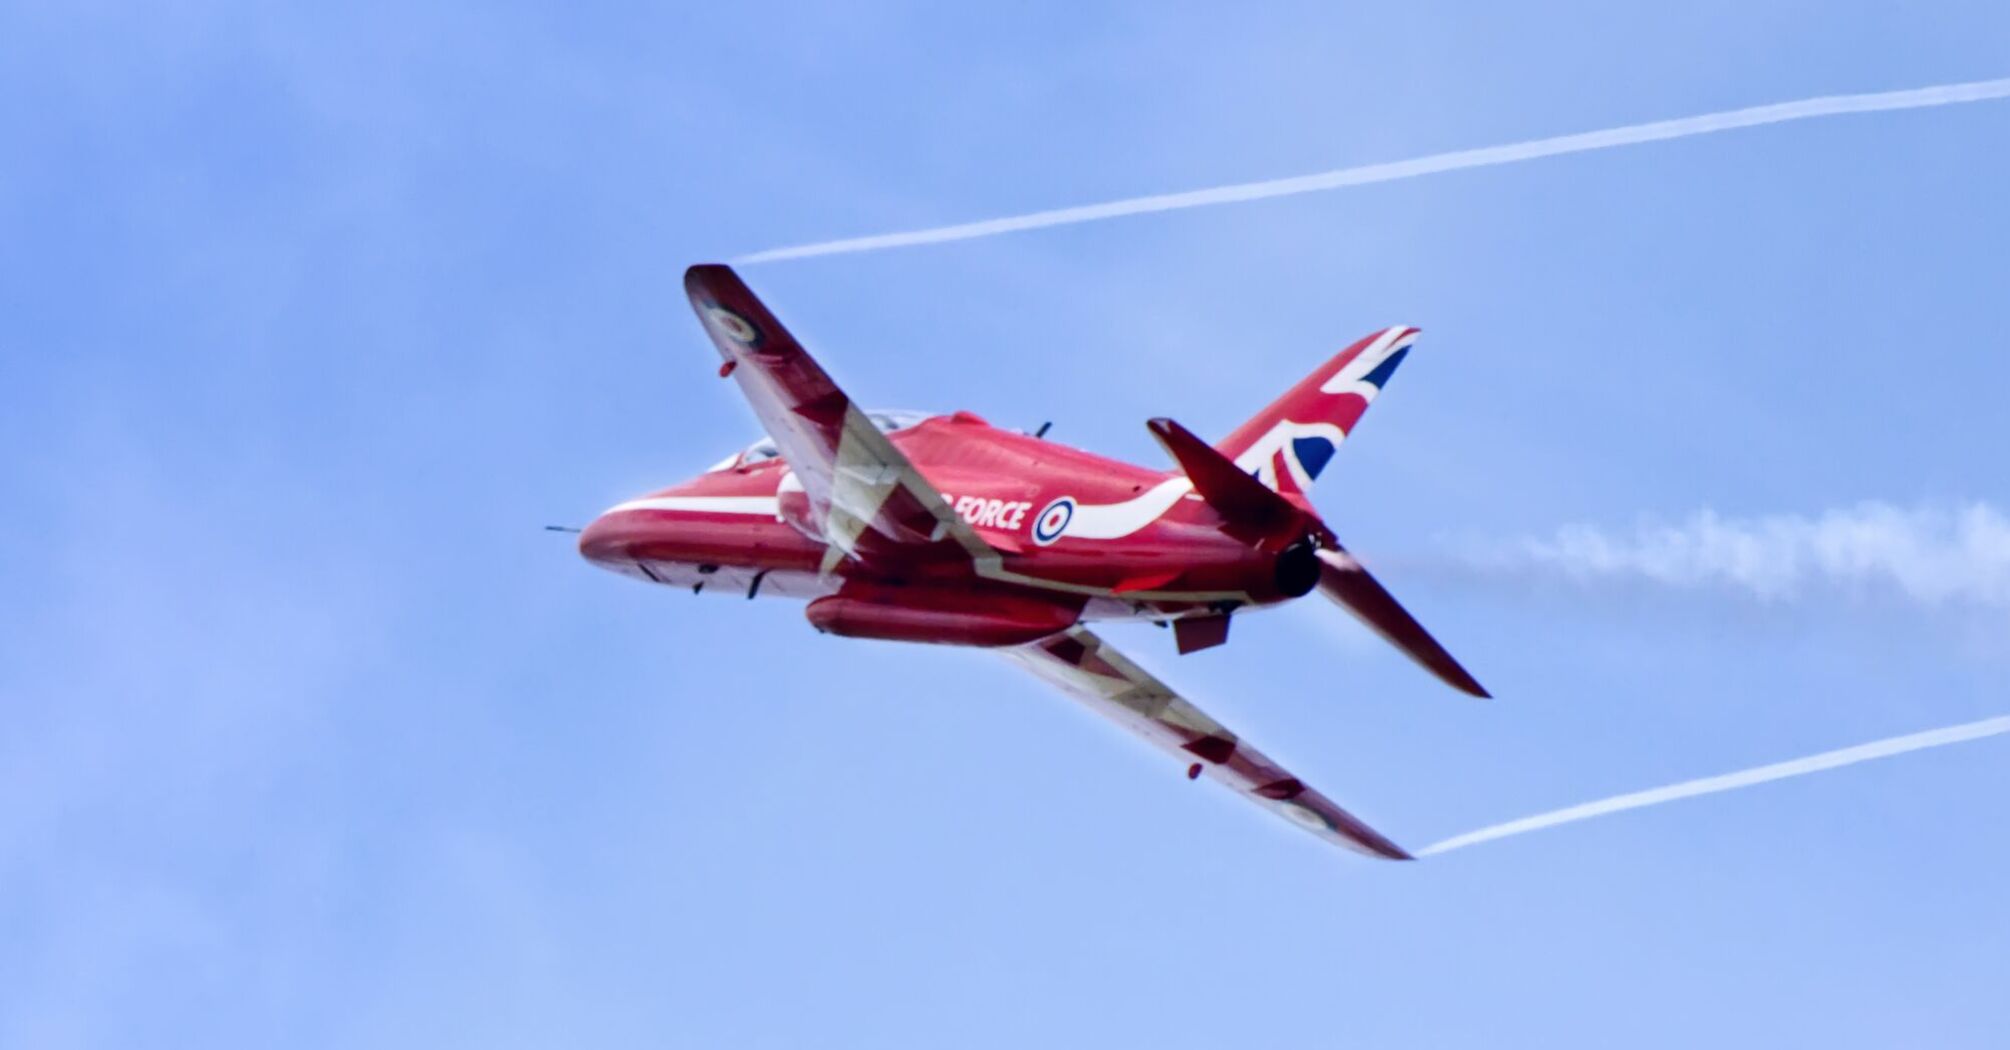 A red jet aircraft with UK insignia performing a dynamic flight maneuver against a clear blue sky with visible contrails